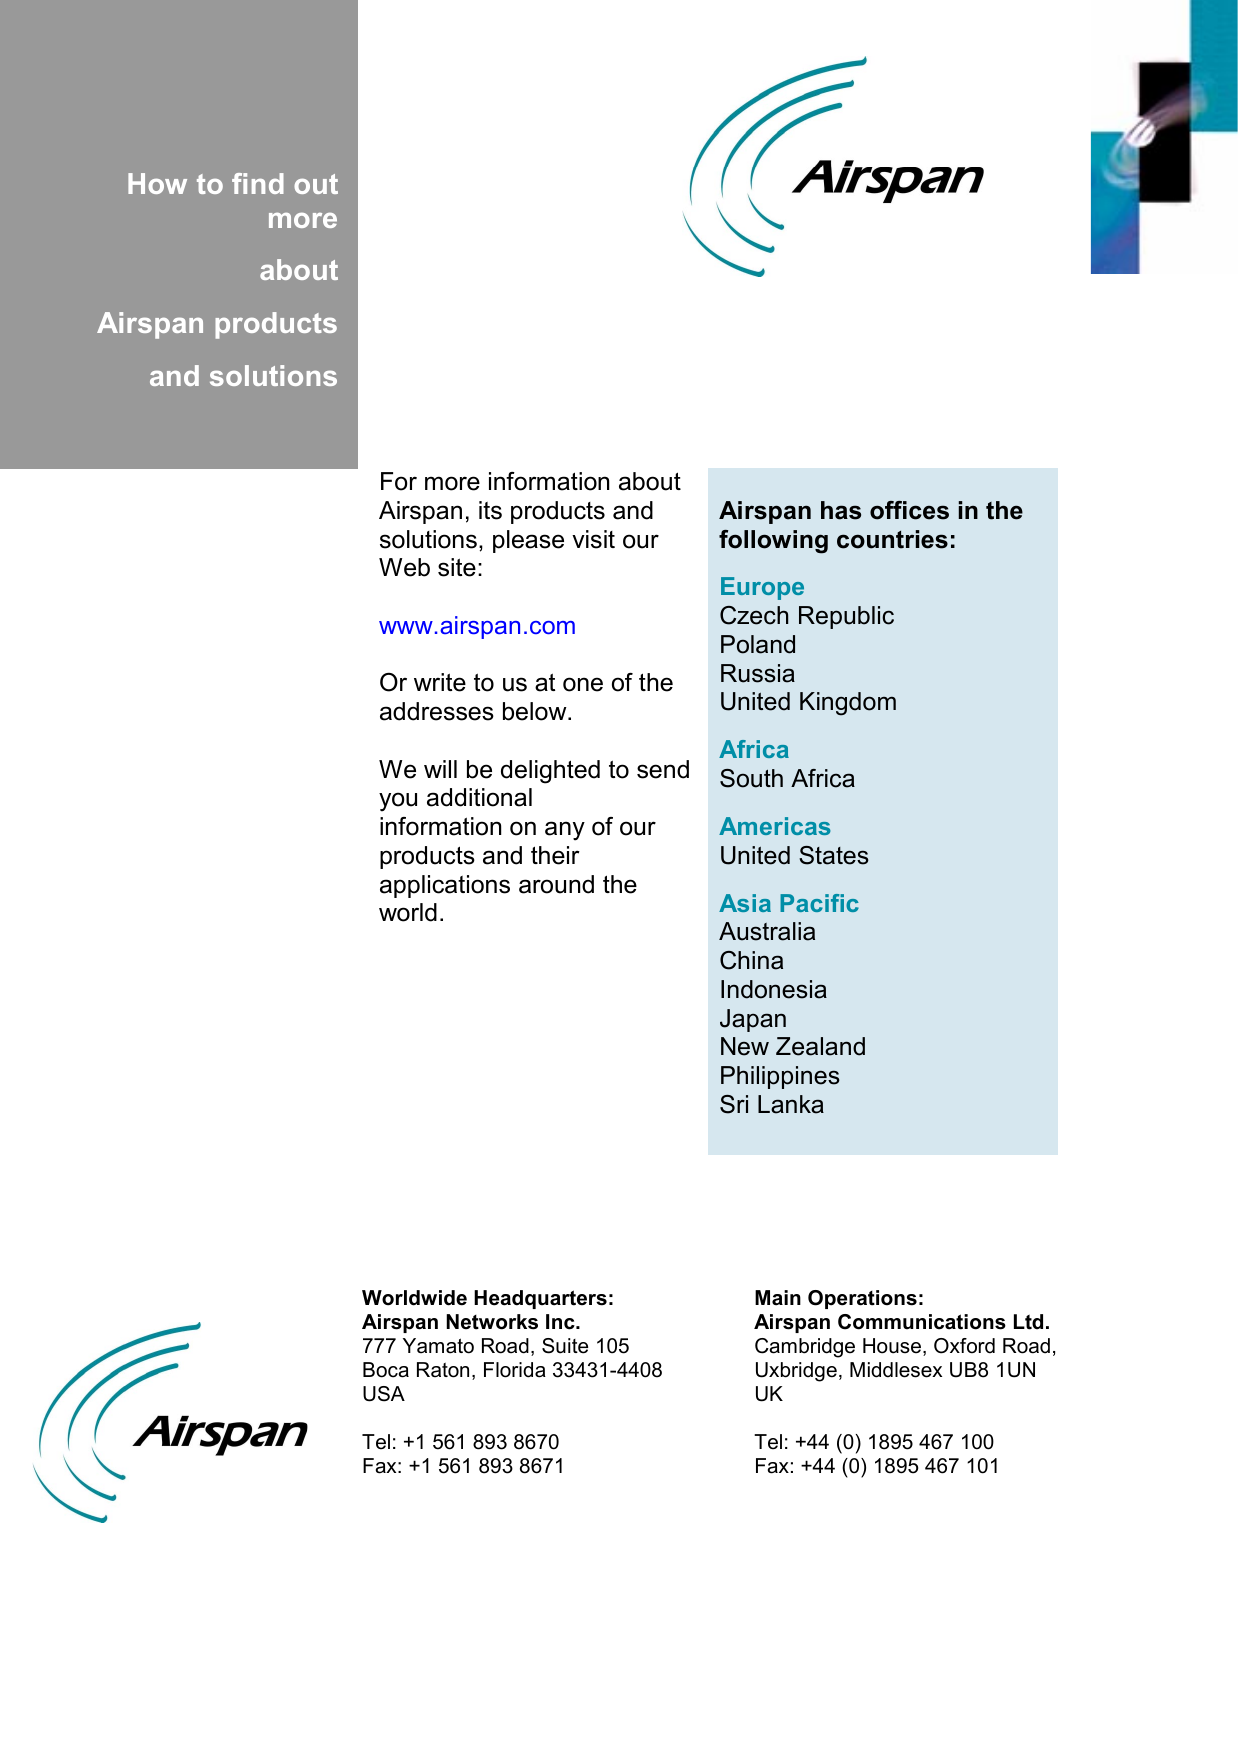          How to find out more  about  Airspan products  and solutions   Airspan has offices in the following countries:  Europe Czech Republic Poland Russia United Kingdom  Africa South Africa  Americas United States  Asia Pacific Australia China Indonesia Japan New Zealand Philippines Sri Lanka For more information about Airspan, its products and solutions, please visit our Web site:  www.airspan.com  Or write to us at one of the addresses below.  We will be delighted to send you additional information on any of our products and their applications around the world.  Main Operations: Airspan Communications Ltd. Cambridge House, Oxford Road, Uxbridge, Middlesex UB8 1UN UK  Tel: +44 (0) 1895 467 100 Fax: +44 (0) 1895 467 101 Worldwide Headquarters:Airspan Networks Inc. 777 Yamato Road, Suite 105 Boca Raton, Florida 33431-4408 USA  Tel: +1 561 893 8670 Fax: +1 561 893 8671  